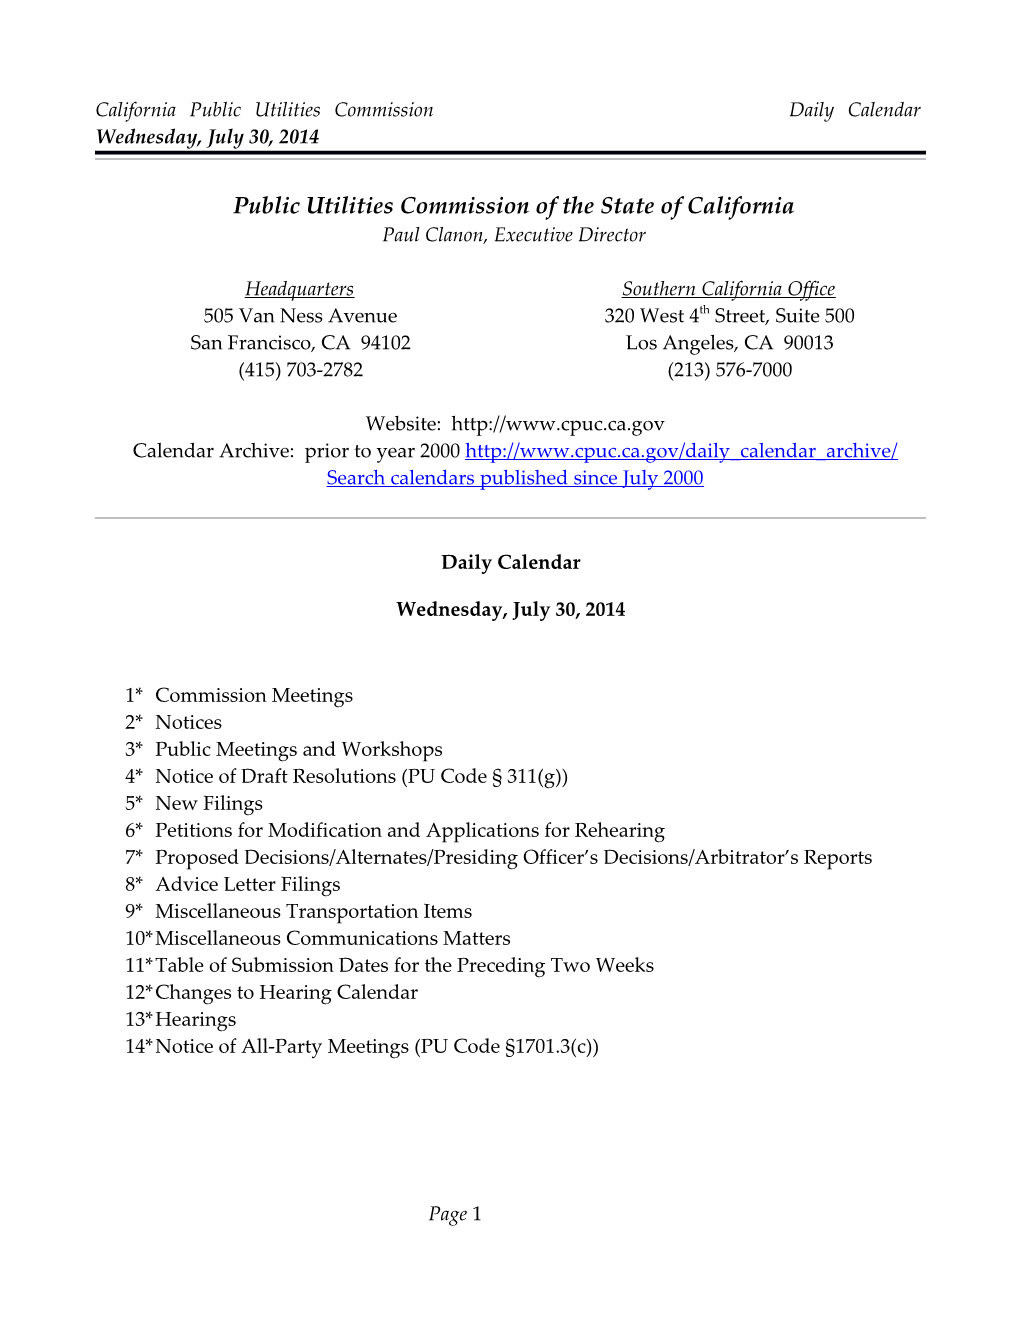 California Public Utilities Commission Daily Calendar Wednesday, July 30, 2014